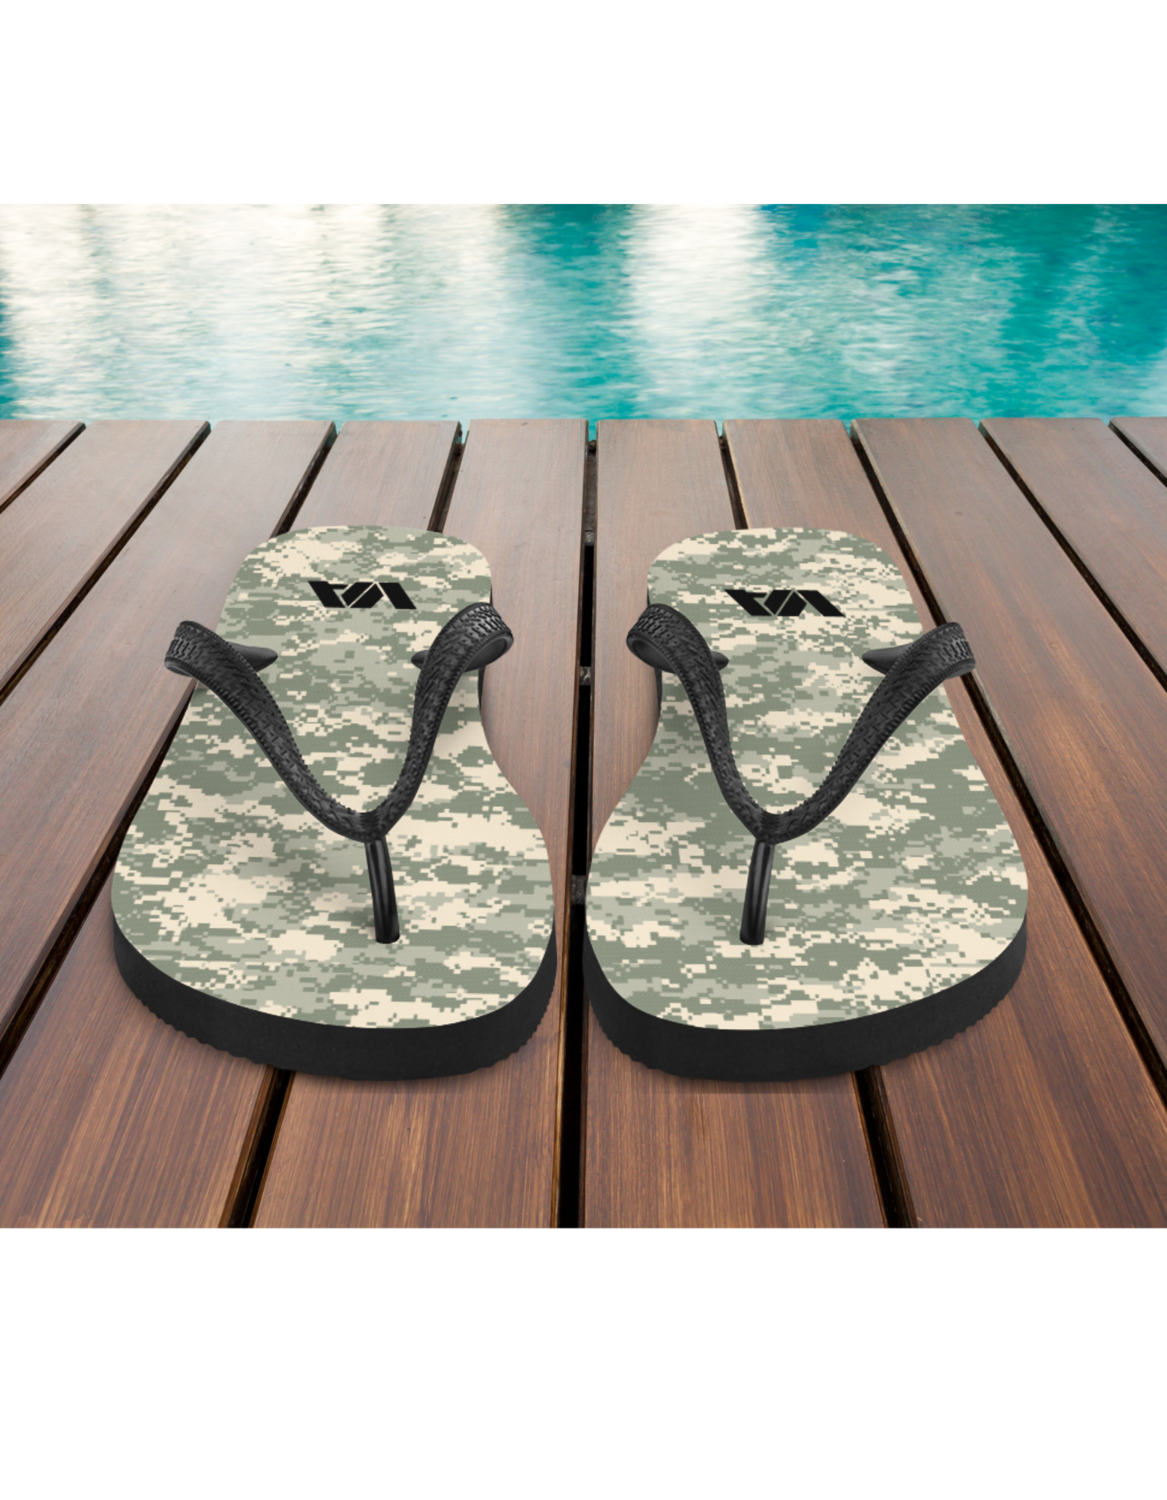 Veteran and military flip flops, Army ACU camo style sandals, men and women footwear.